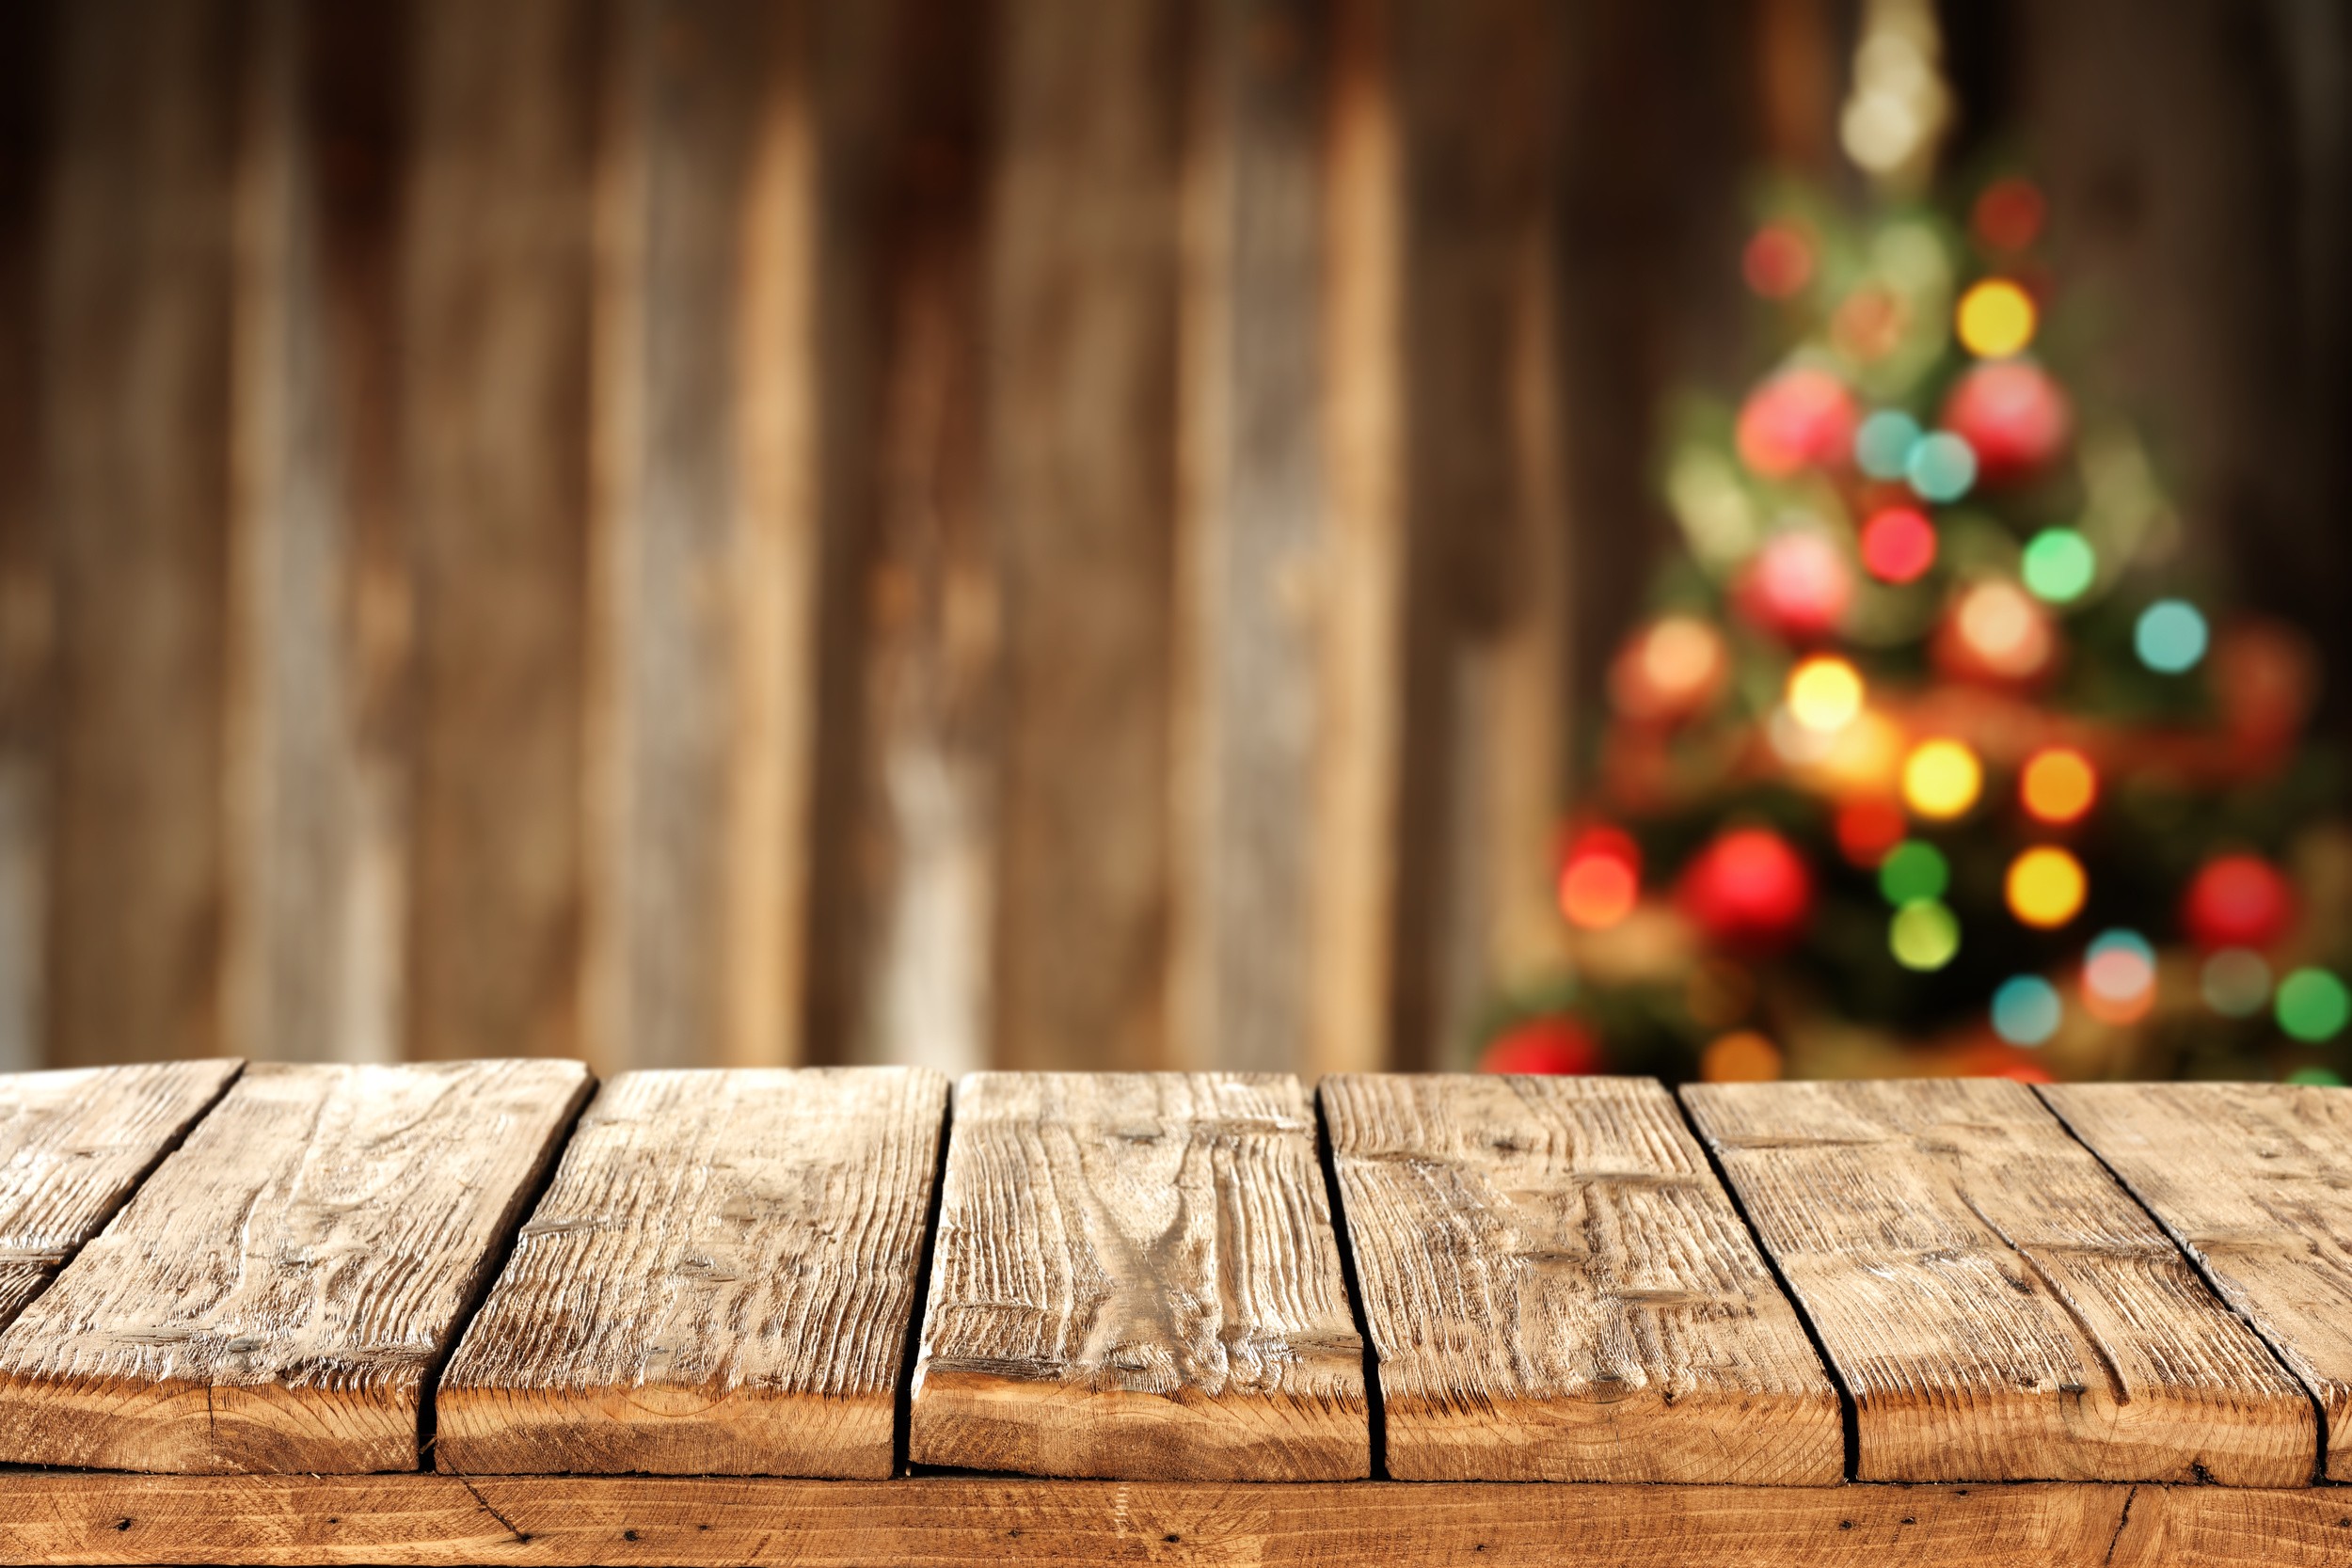 Vintage Christmas background ·① Download free stunning wallpapers for desktop and mobile devices